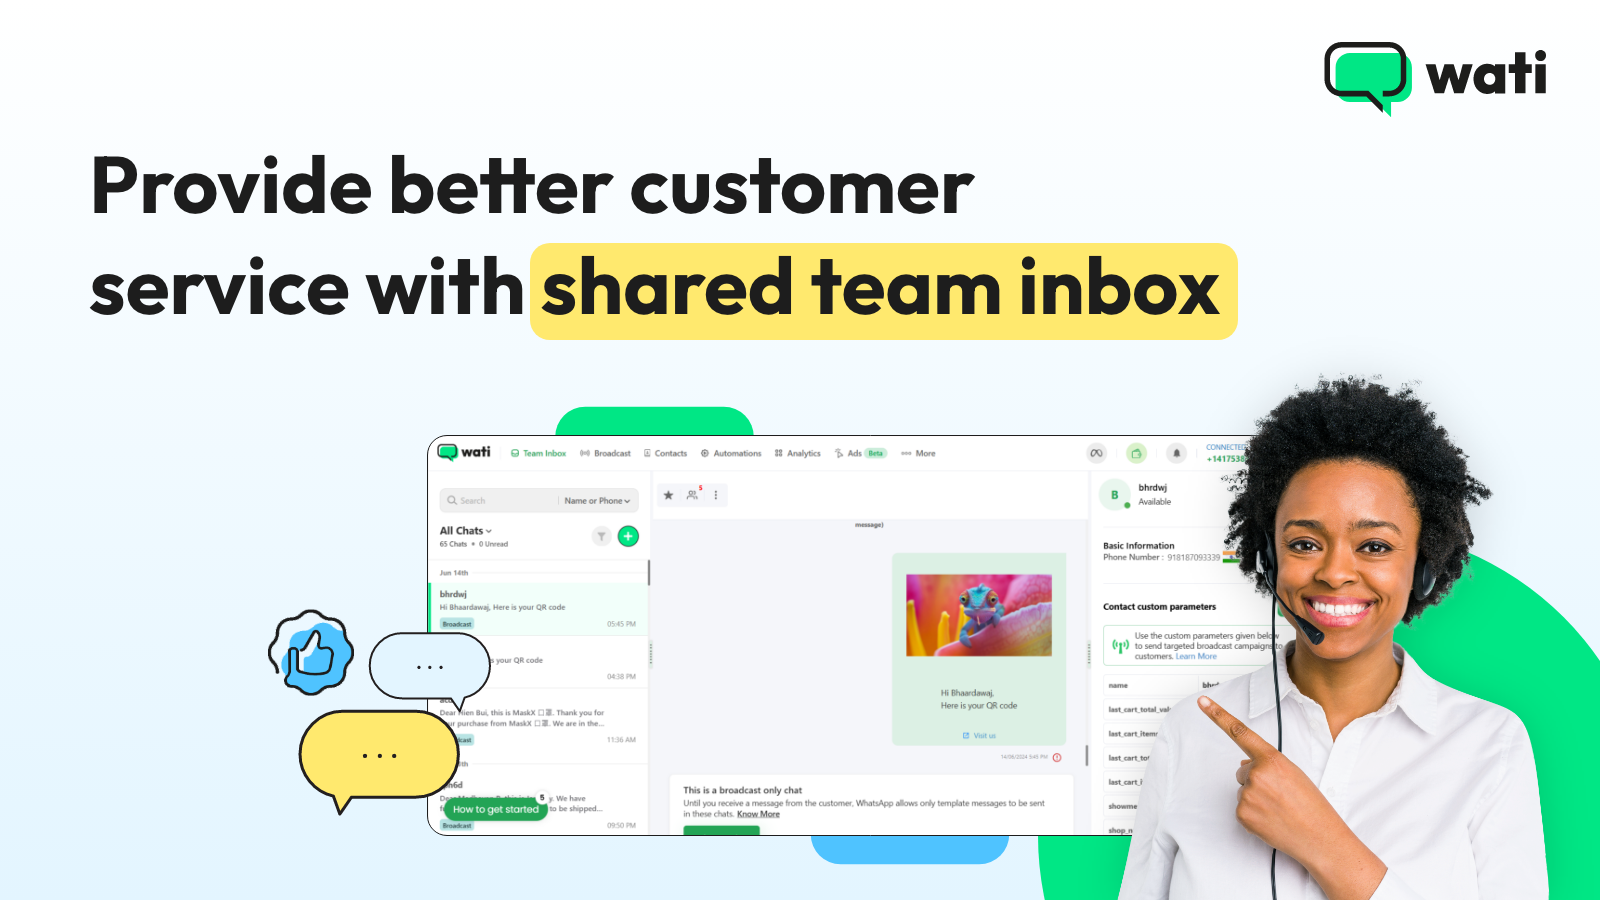 Provide better customer service with shared team inbox